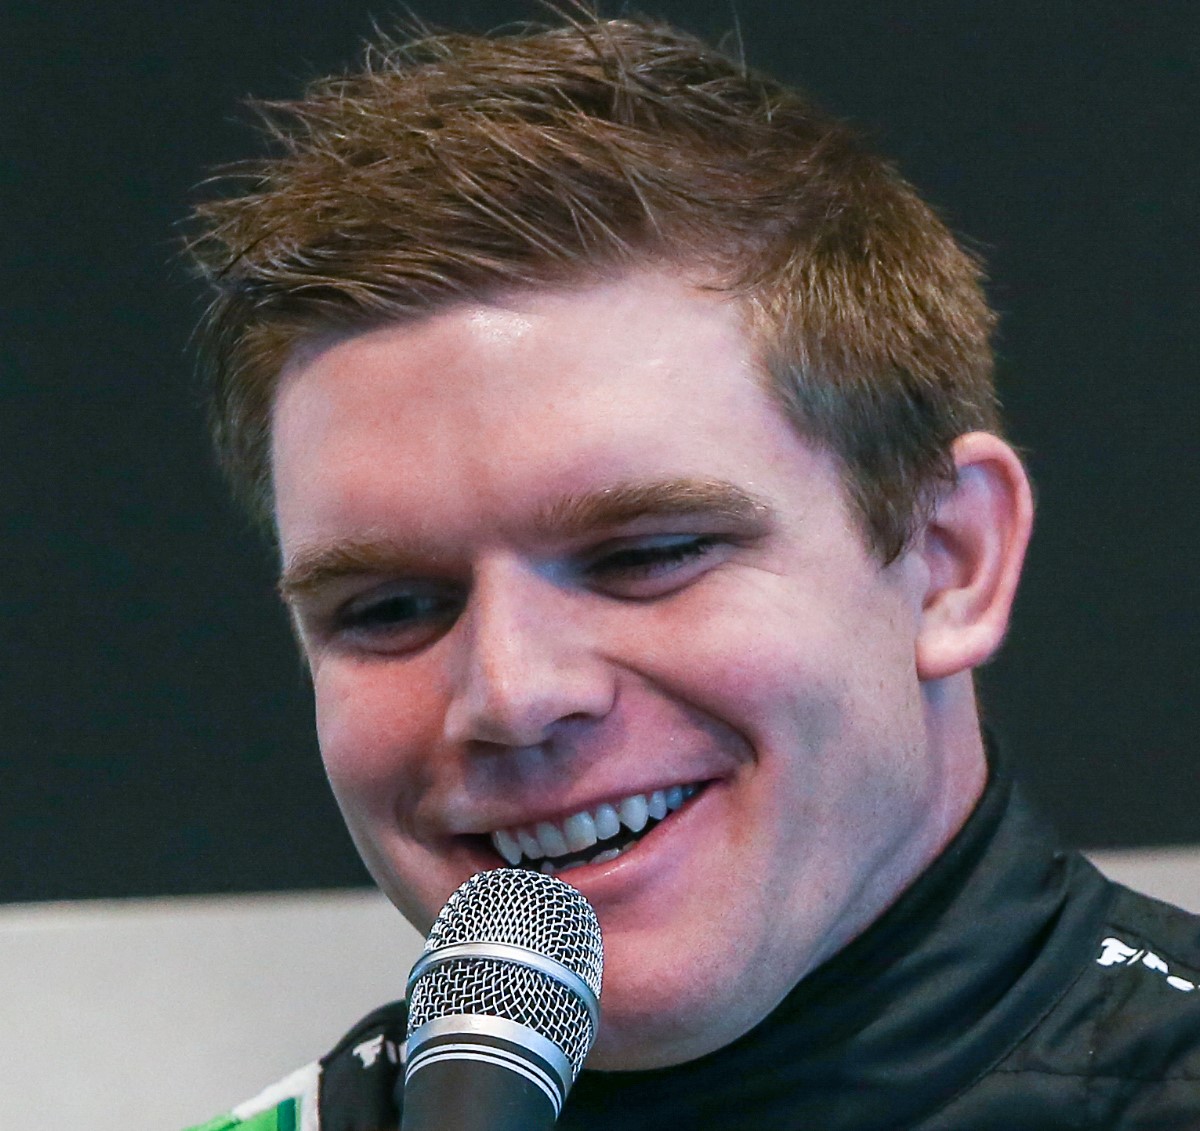 Conor Daly asked Rossi to go karting.